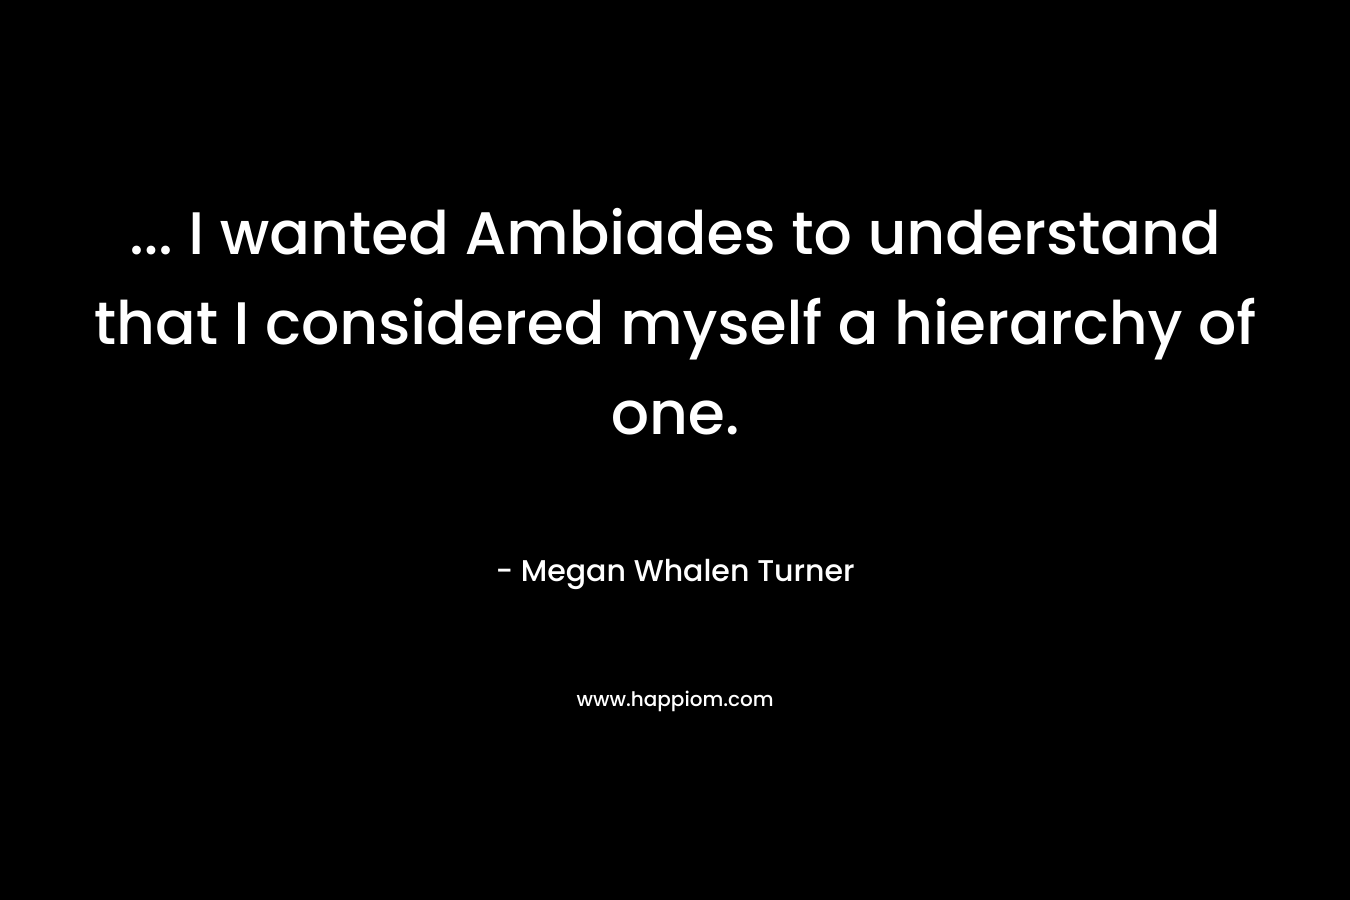 … I wanted Ambiades to understand that I considered myself a hierarchy of one. – Megan Whalen Turner